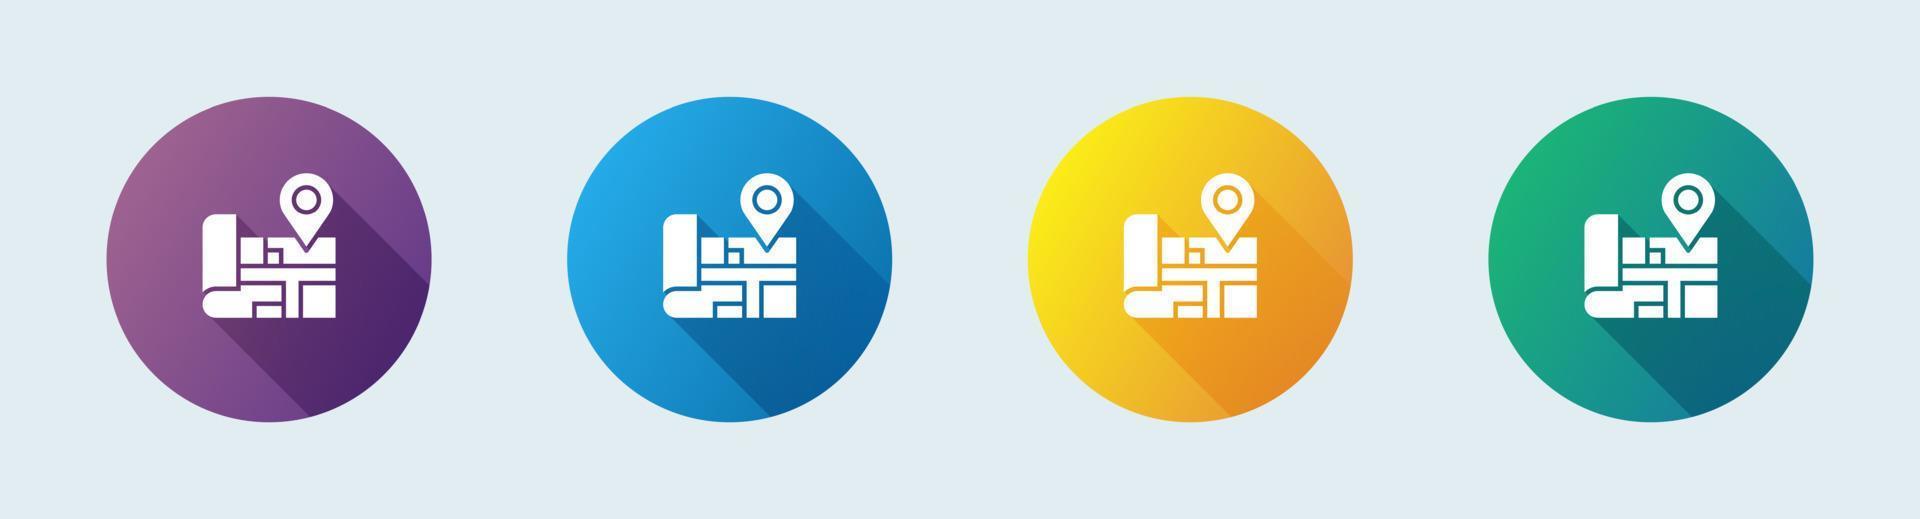 Maps solid icon in flat design style. Location pin signs vector illustration.